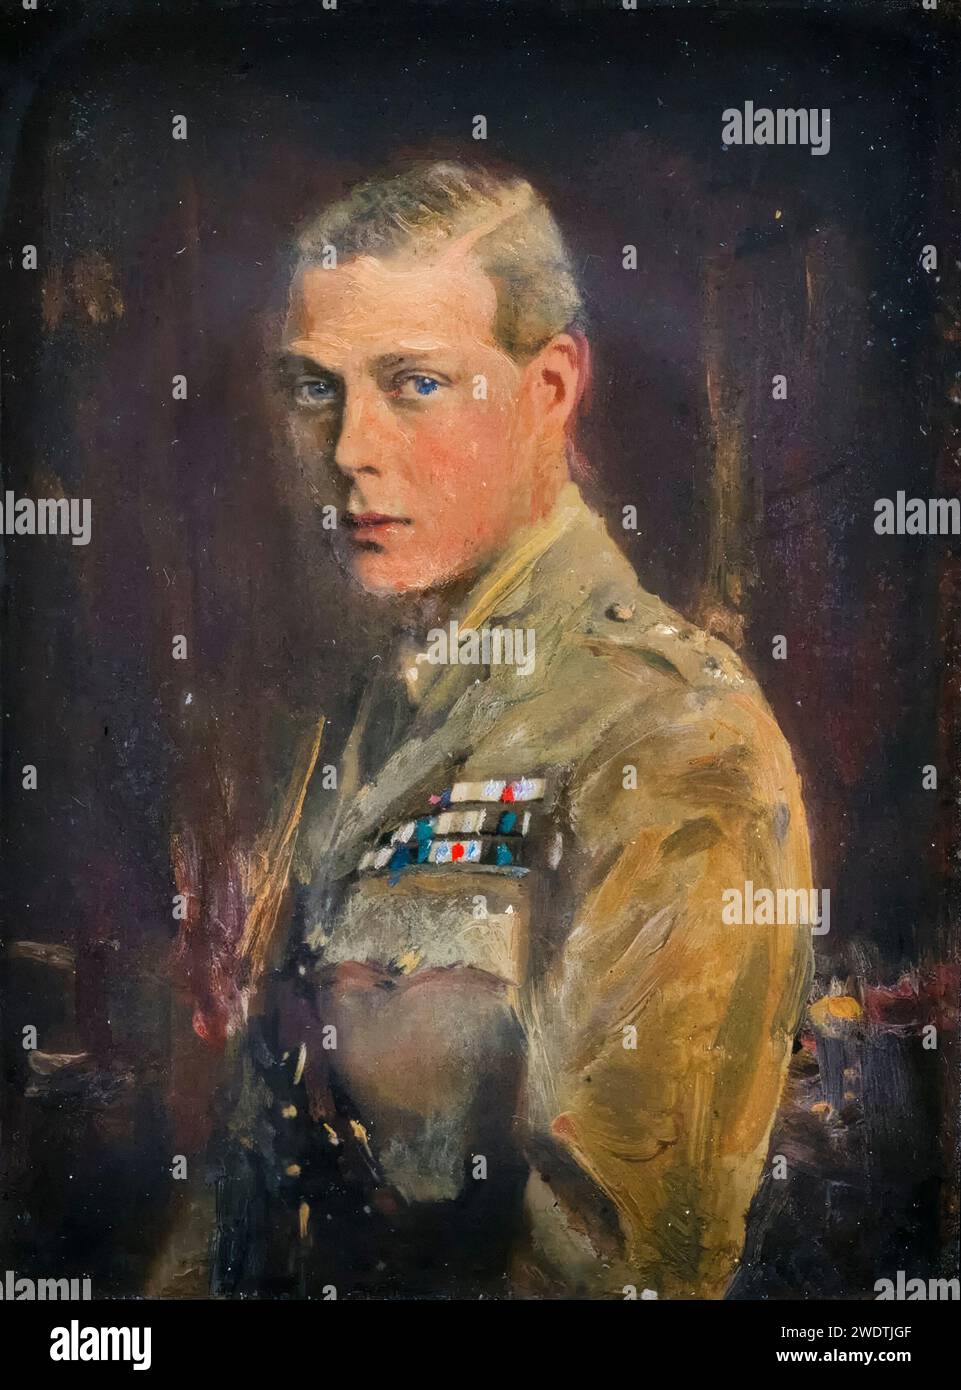 Edward VIII (1894-1972), reigned (1936-1936), as Prince Edward (later Duke of Windsor), portrait painting in oil on photograph, mounted on board by Reginald Grenville Eves, circa 1920 Stock Photo